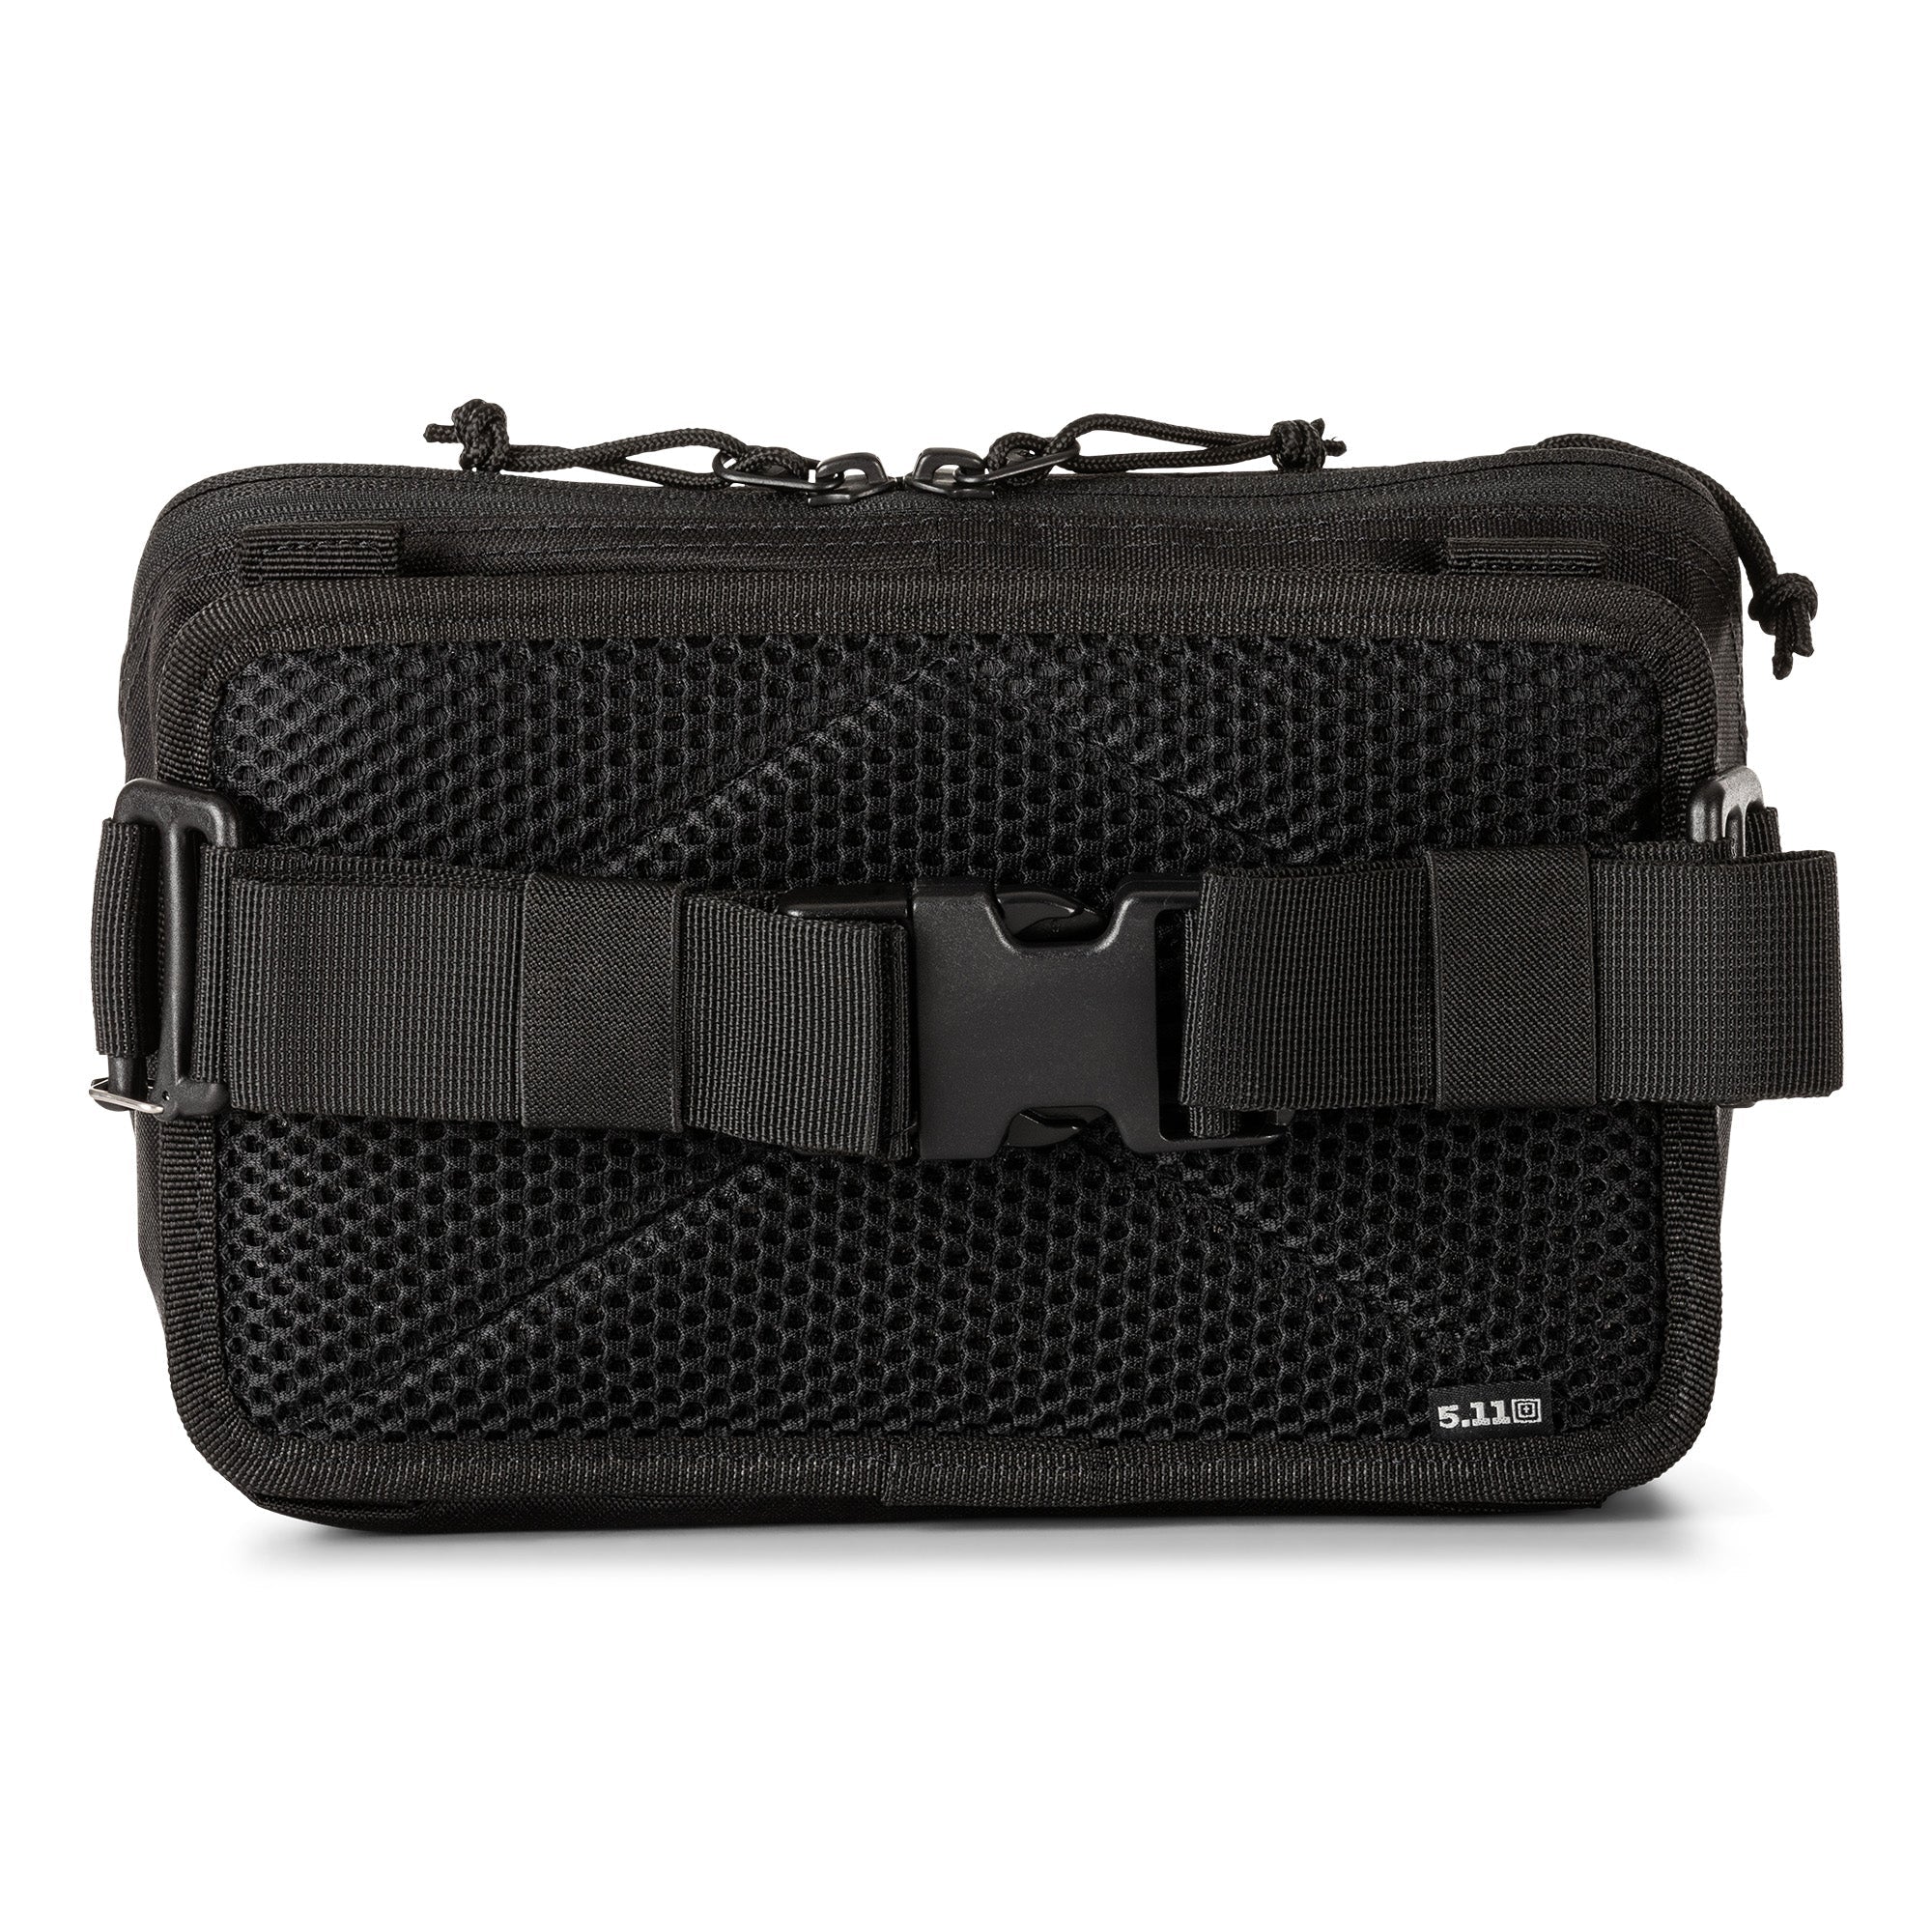 5.11 Tactical Rapid Waist Pack Bags, Packs and Cases 5.11 Tactical Black Tactical Gear Supplier Tactical Distributors Australia